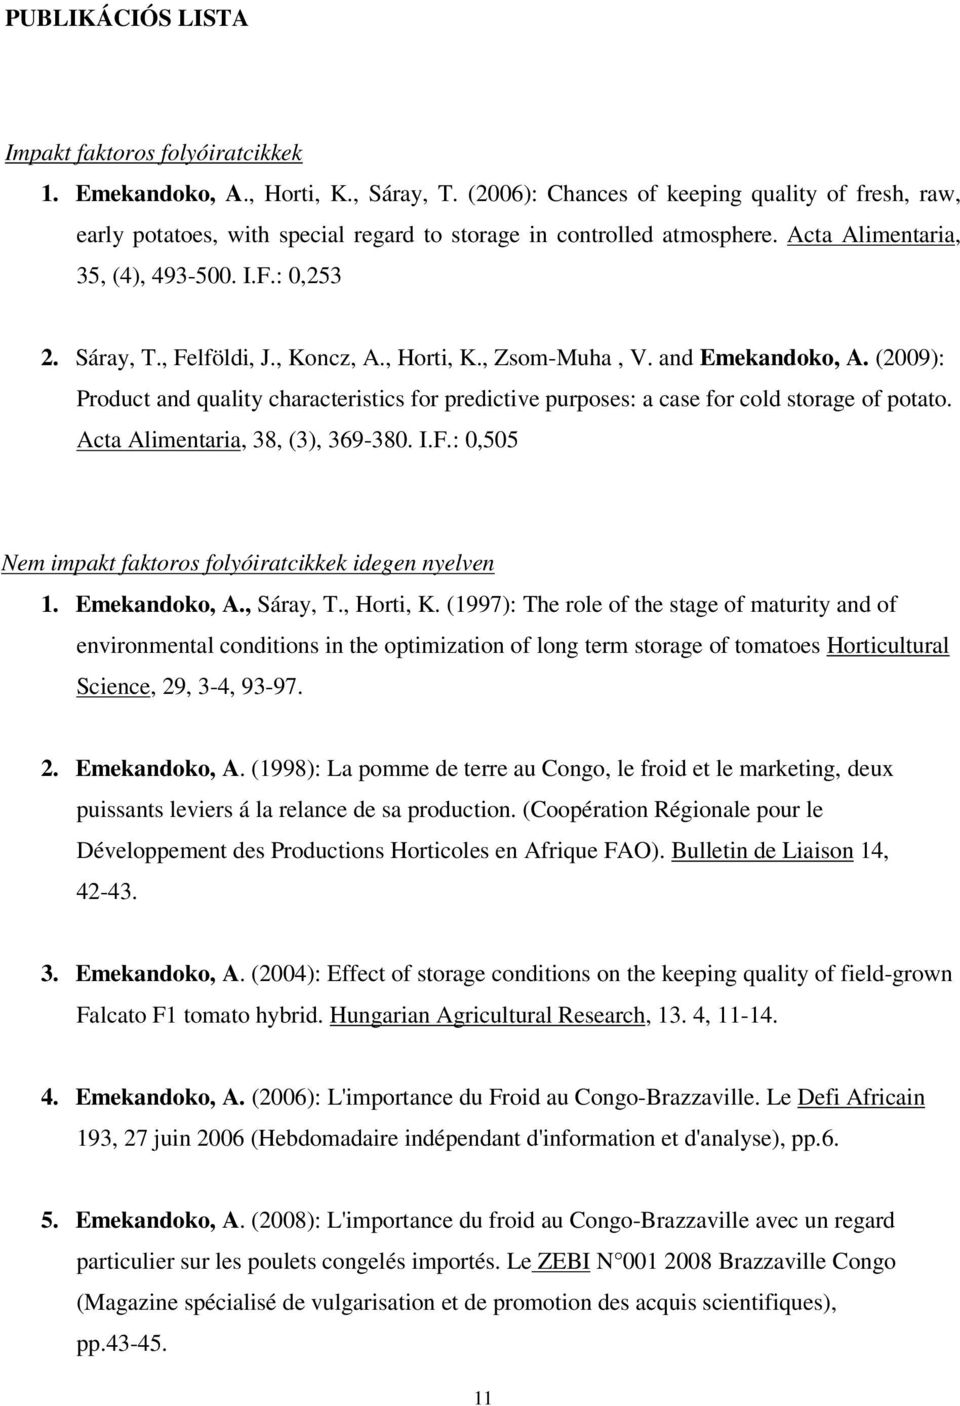 , Koncz, A., Horti, K., Zsom-Muha, V. and Emekandoko, A. (2009): Product and quality characteristics for predictive purposes: a case for cold storage of potato. Acta Alimentaria, 38, (3), 369-380. I.